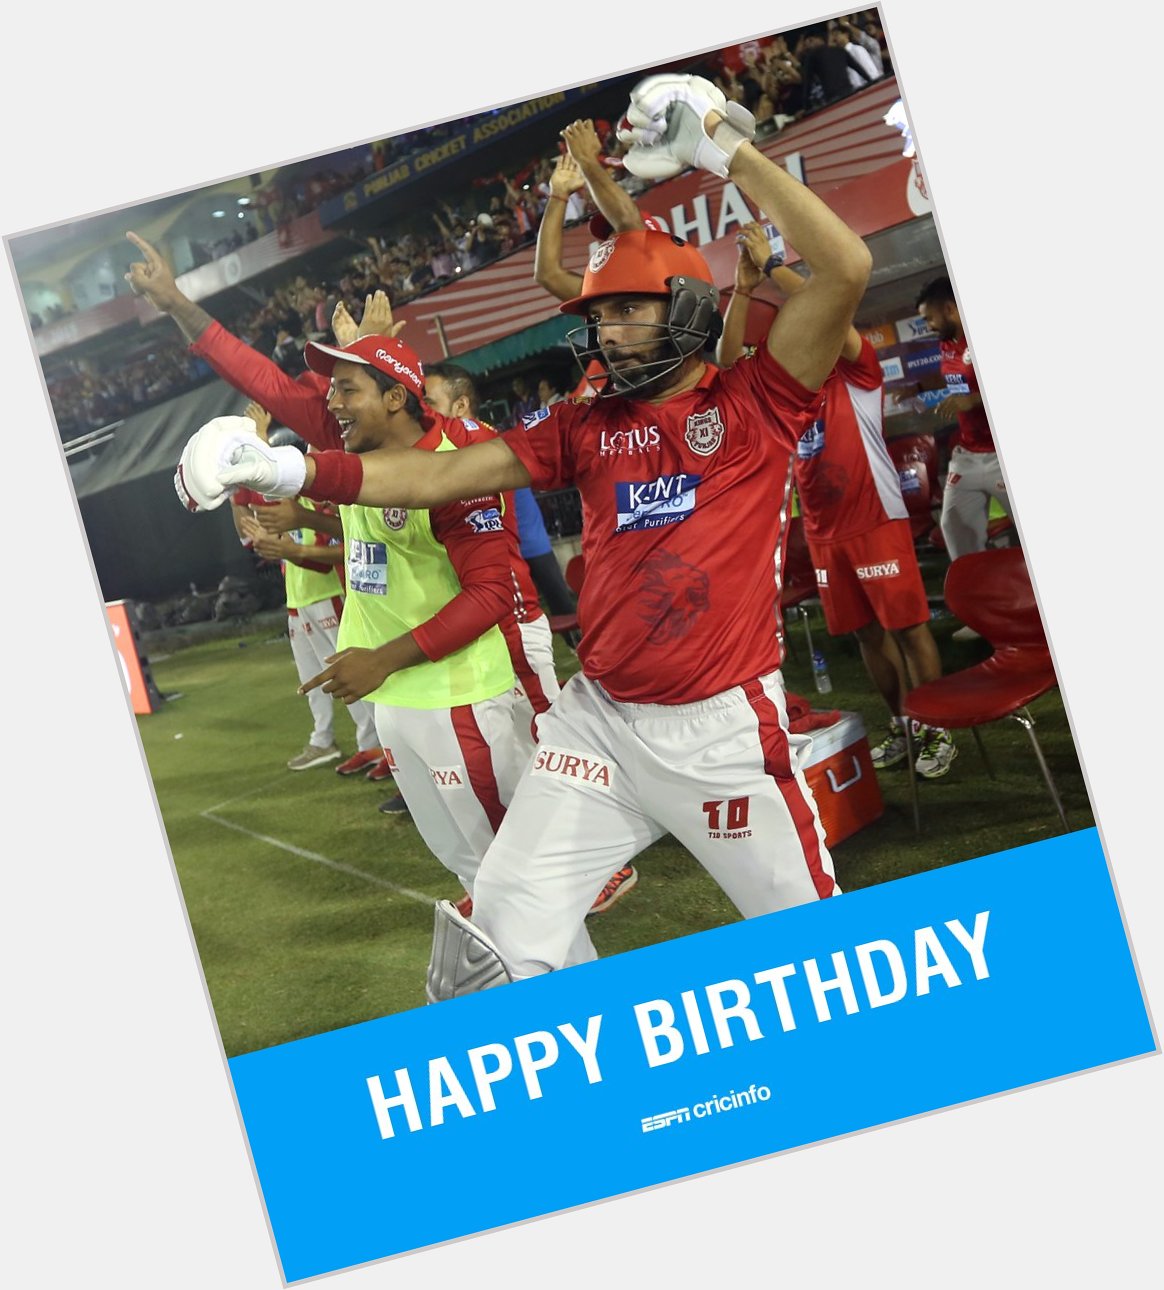  Happy birthday to Yuvraj Singh! 

What\s your favourite memory? 

 